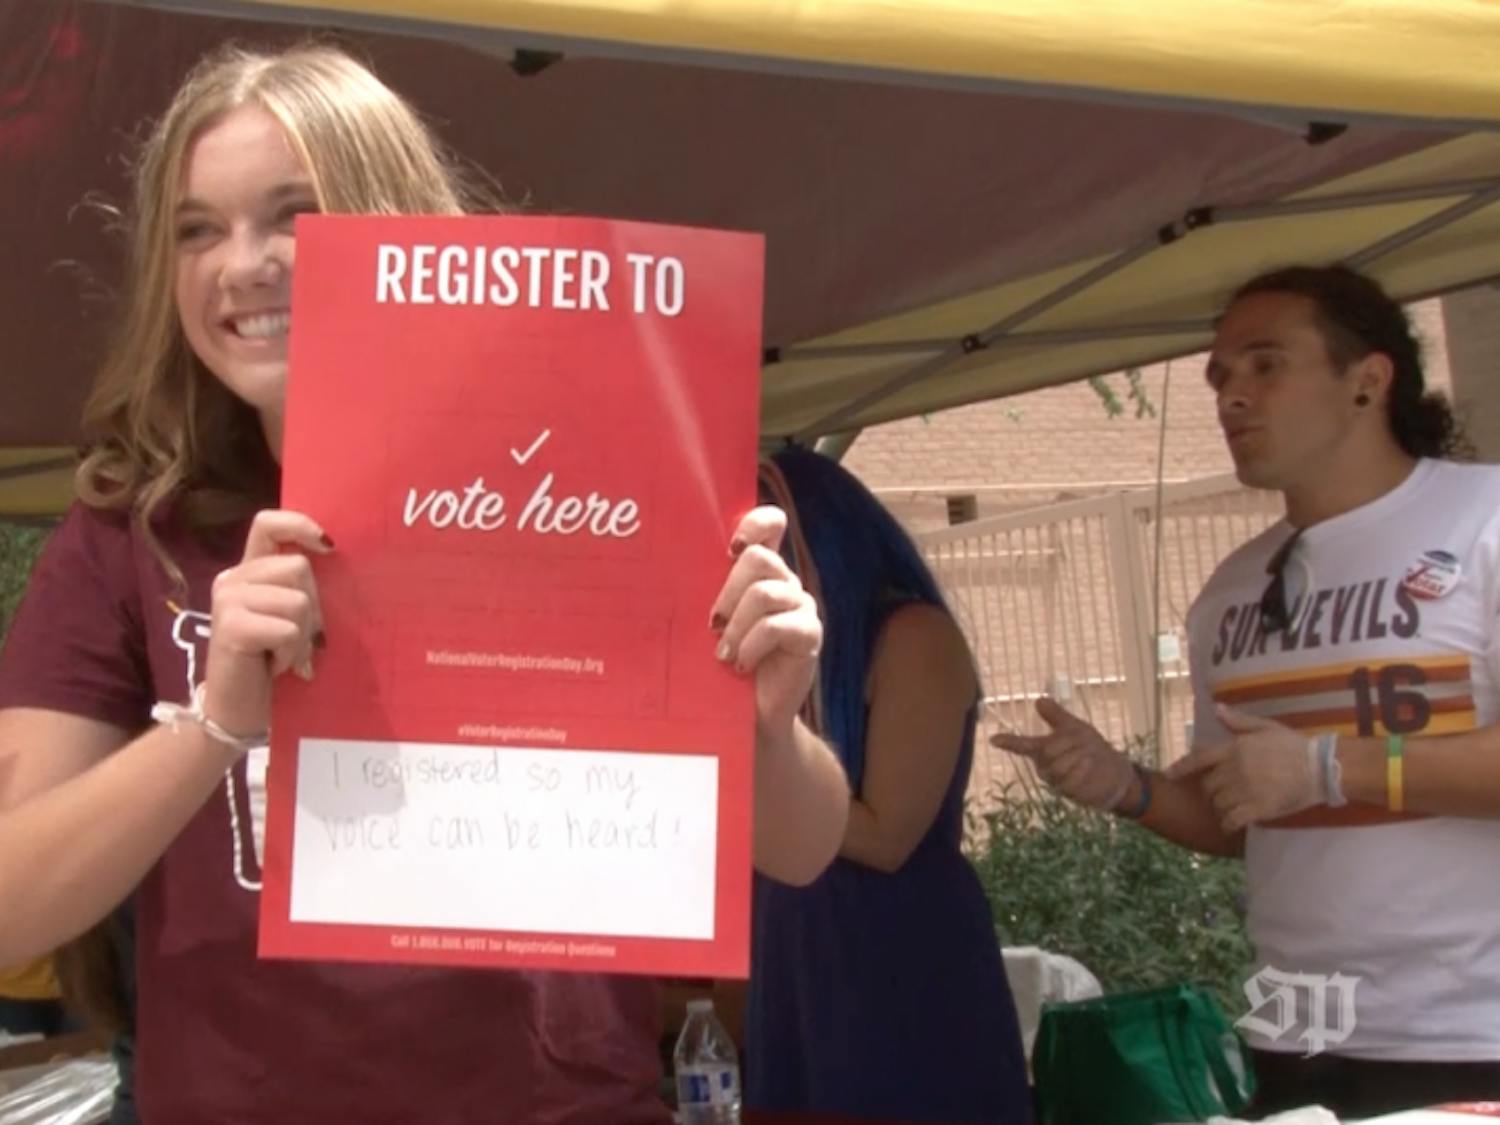 A student registers to vote on the downtown Phoenix campus.